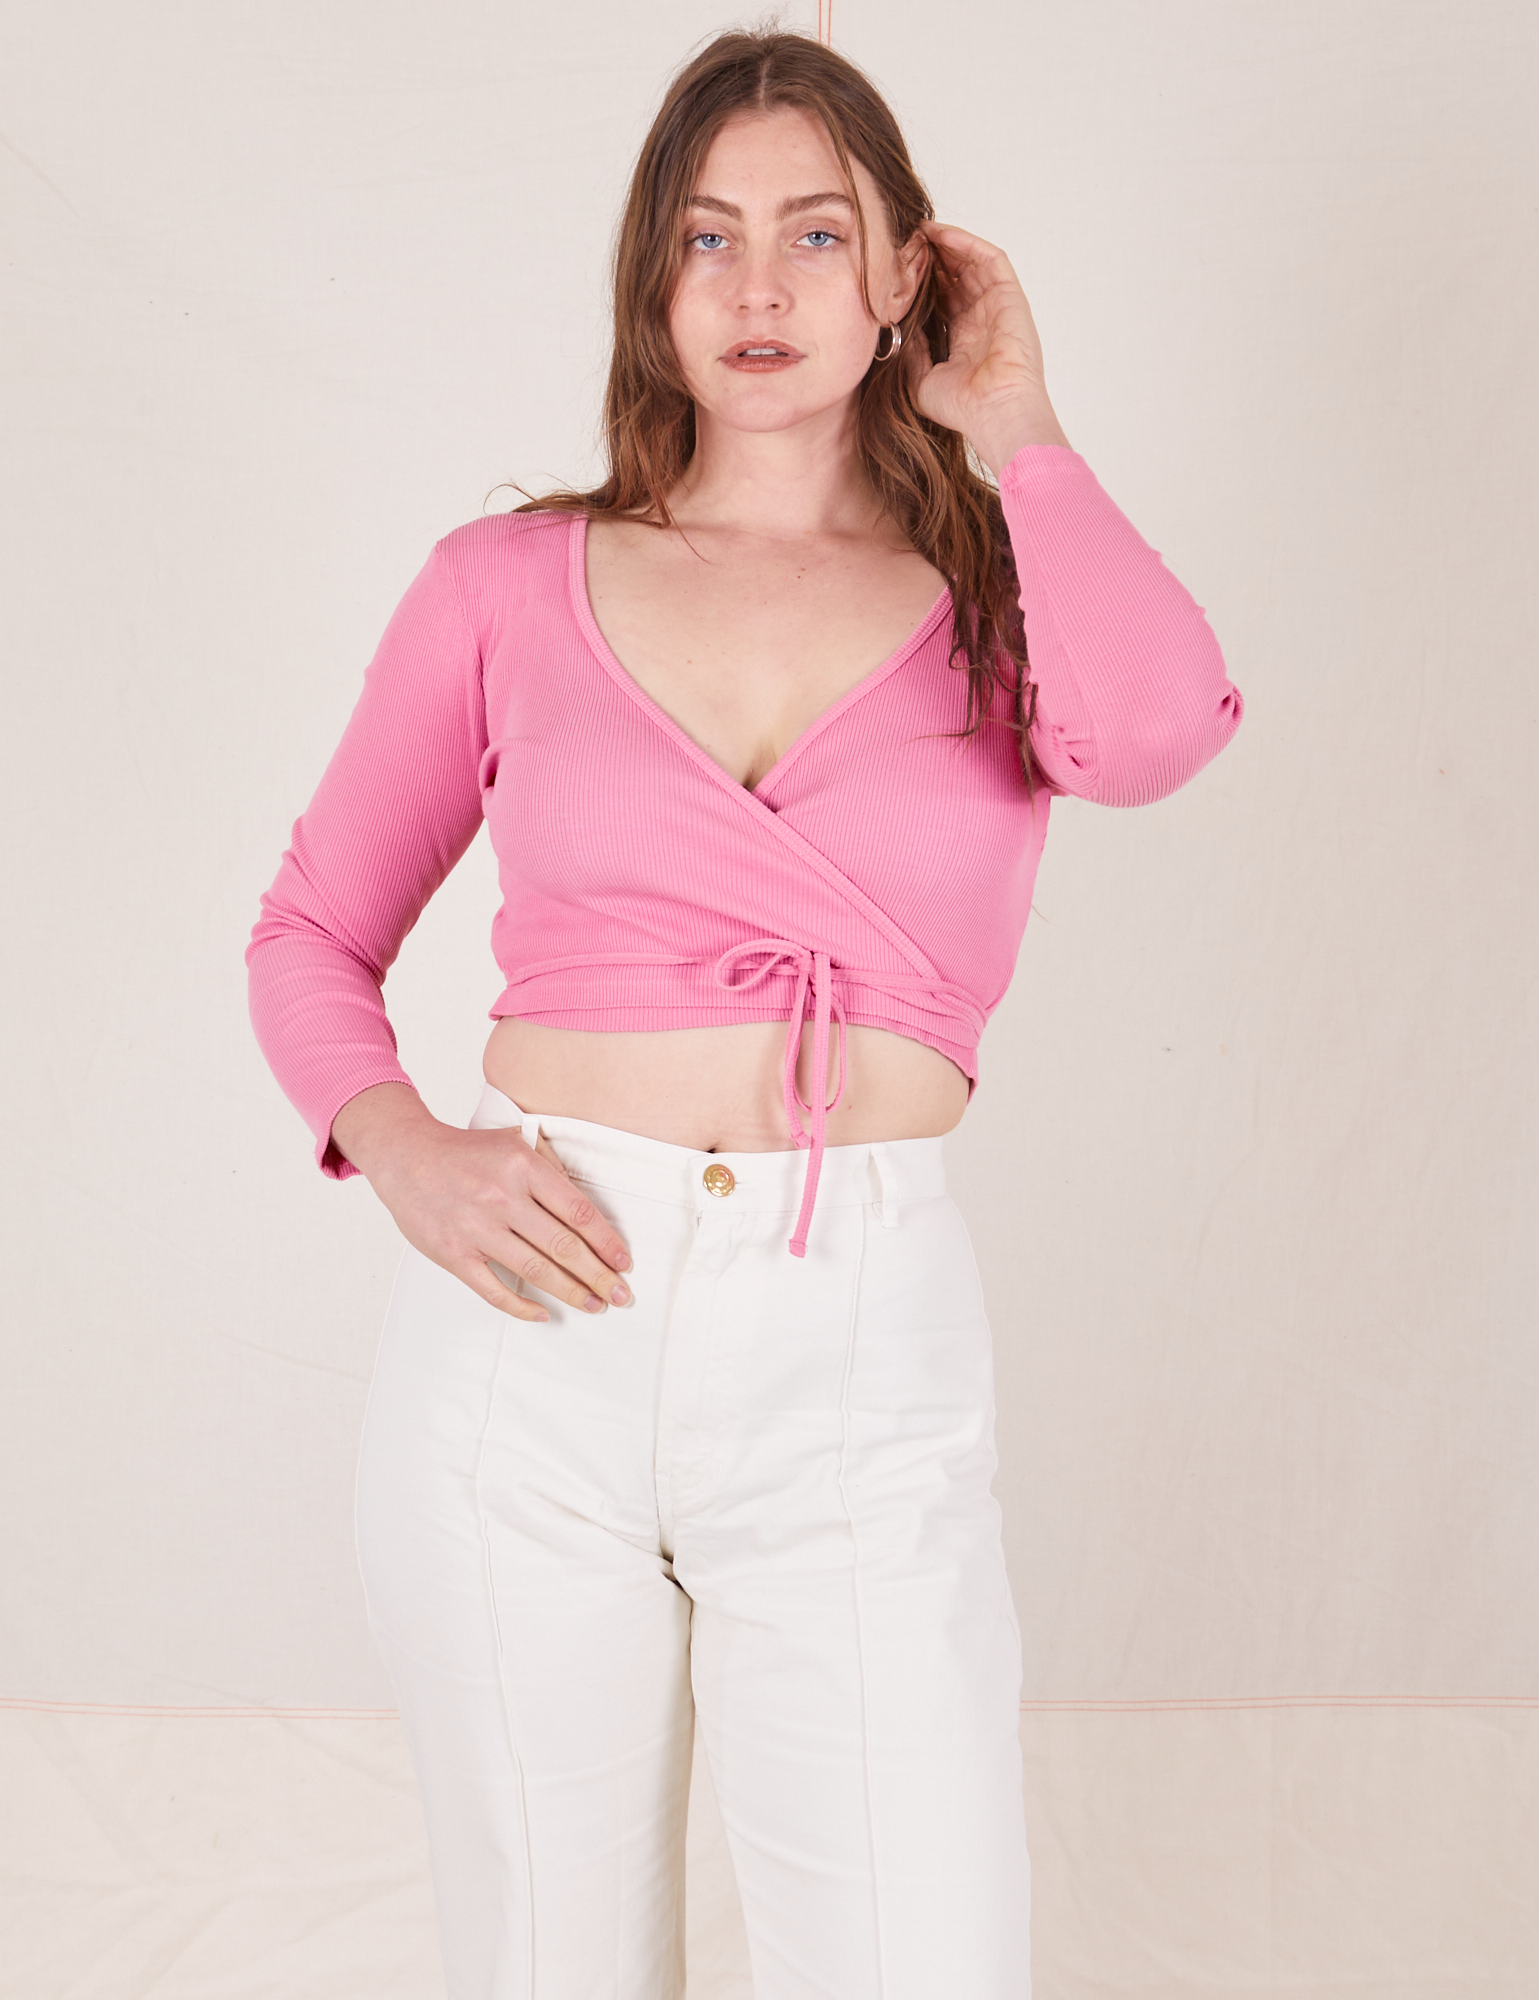 Allison wearing size 1 Wrap Top in Bubblegum Pink paired with vintage tee off-white Western Pants